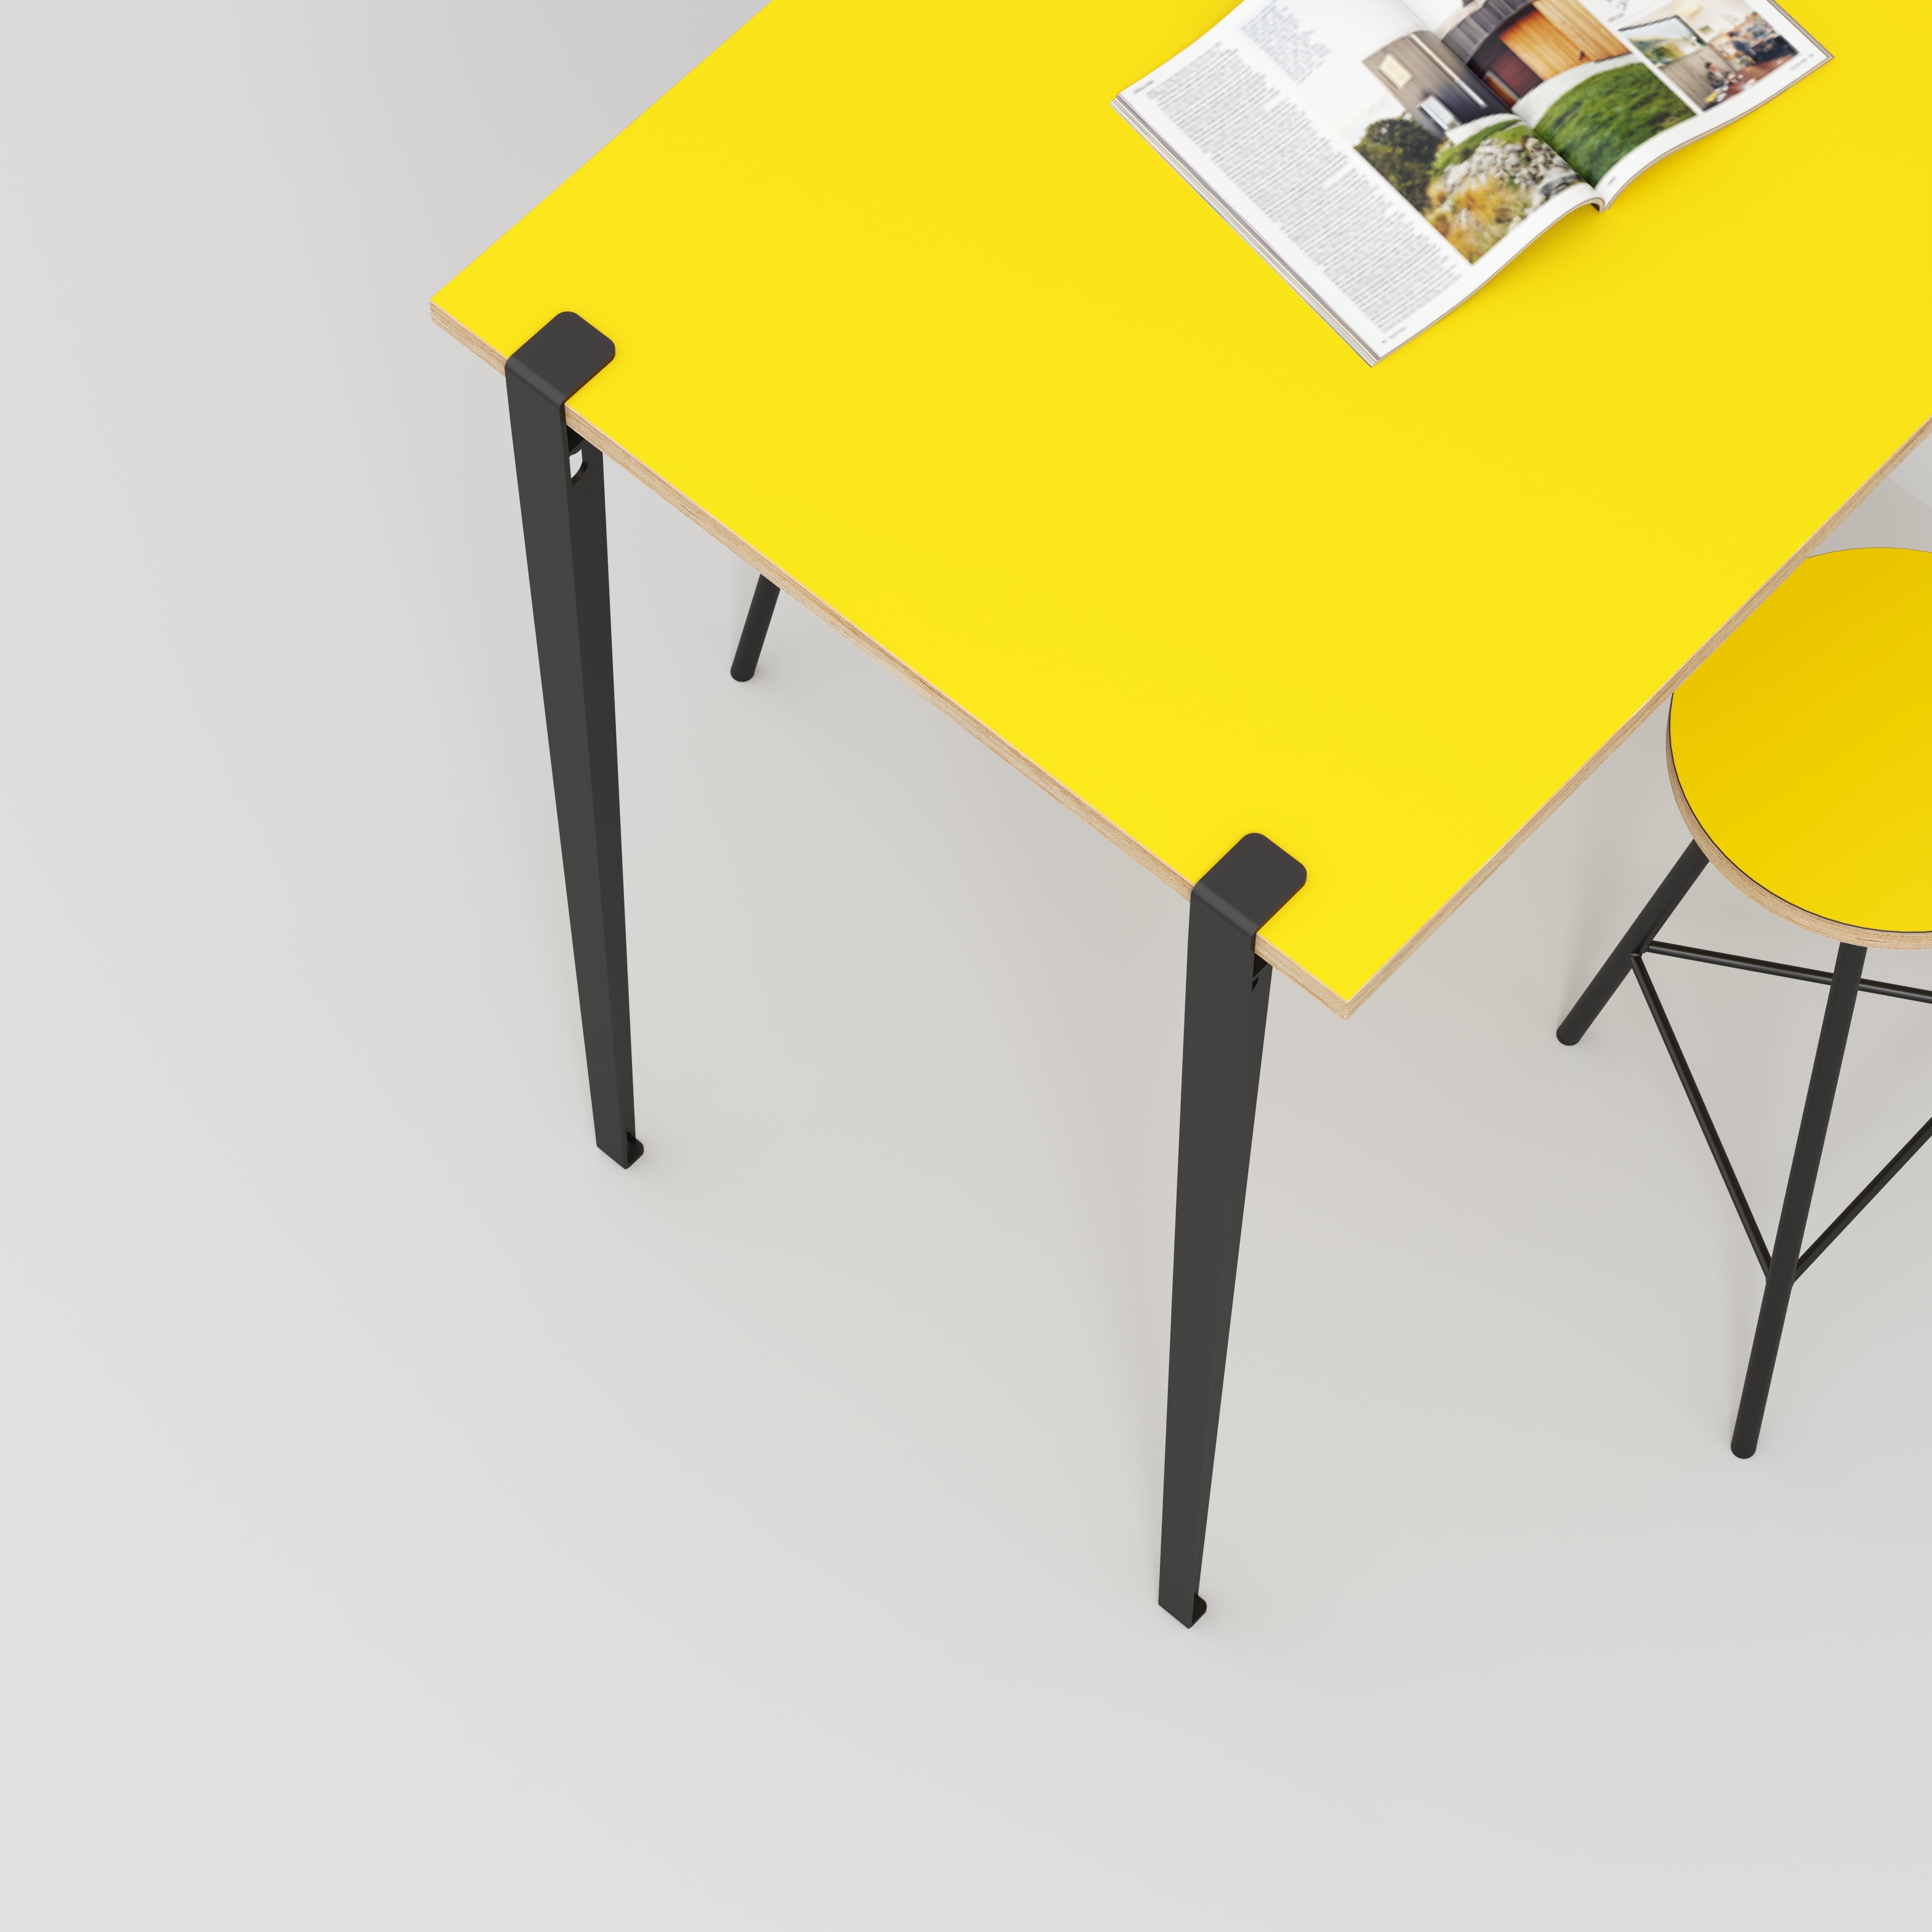 Wall Table with Black Tiptoe Legs and Brackets - Formica Chrome Yellow - 1200(w) x 800(d) x 1100(h)